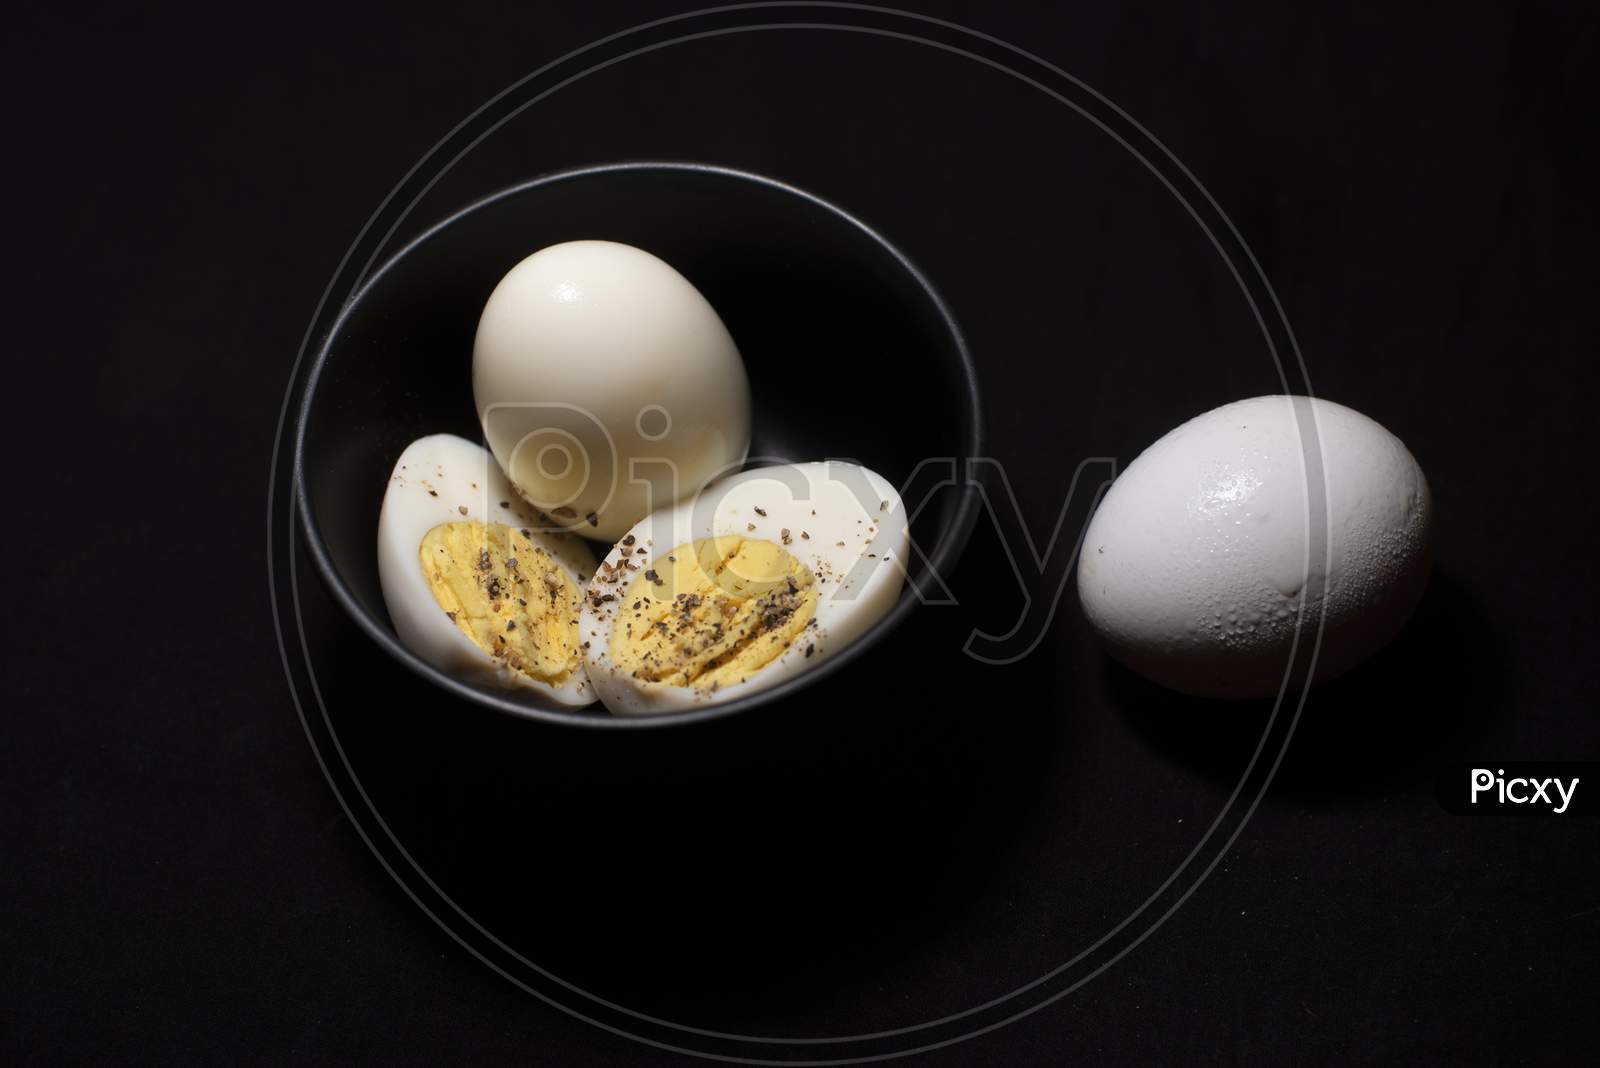 Boiled Eggs In A Bowl Along With A Raw Egg In Dark Copy Space Background. Food And Product Photography.